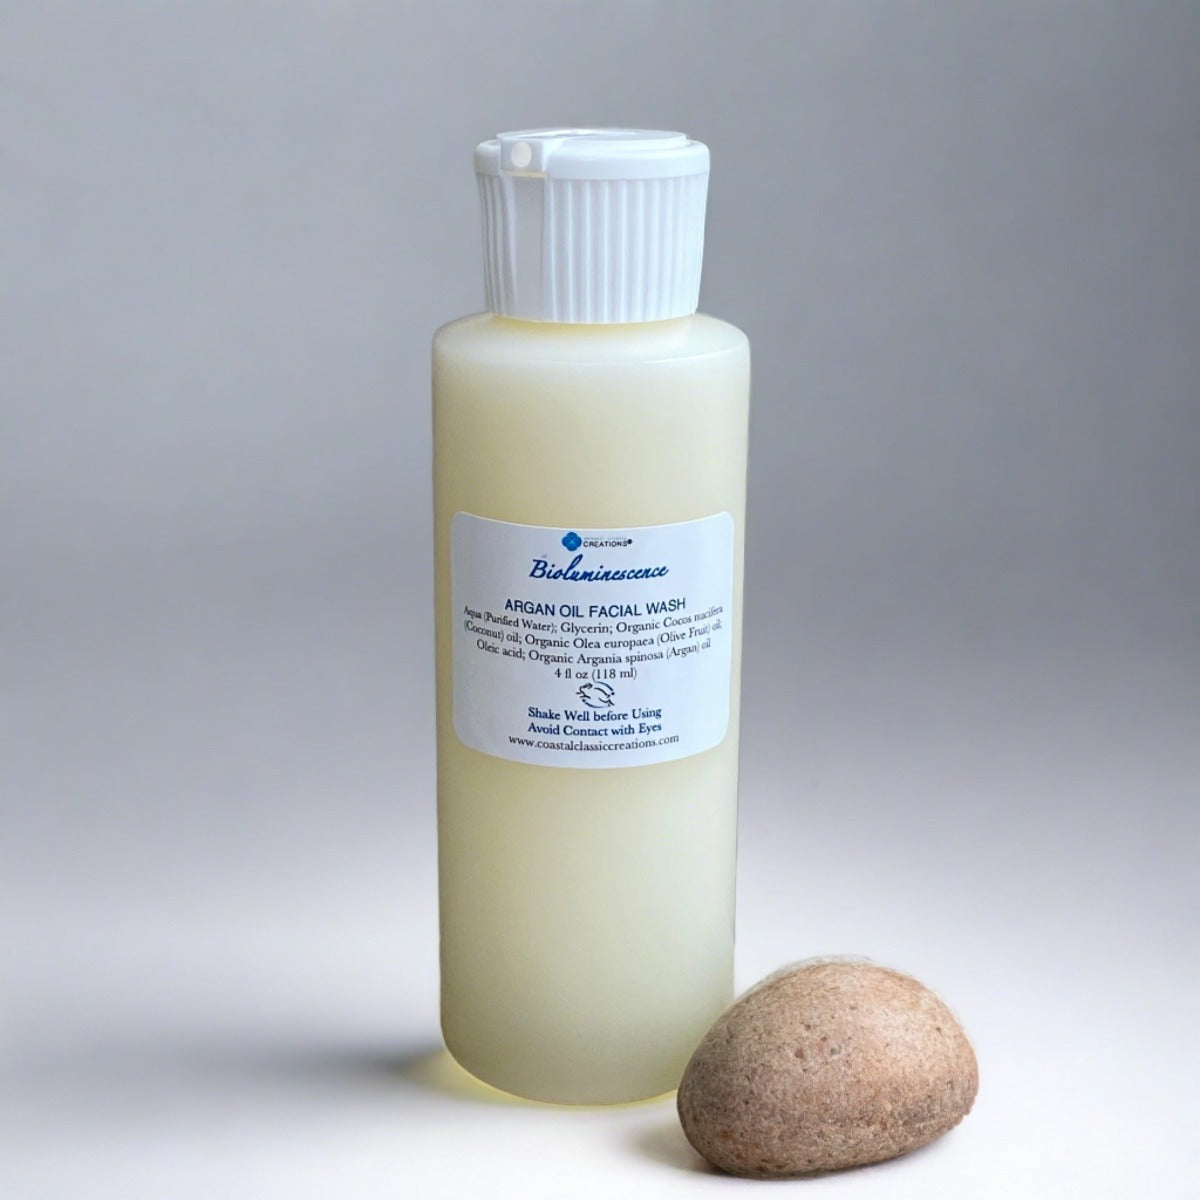 Bioluminescence Argan Facial Wash: A 4 oz bottle with a white flip cap containing a fragrance-free, plant-based cleanser. The label showcases its natural ingredients, promising a gentle yet effective cleansing experience